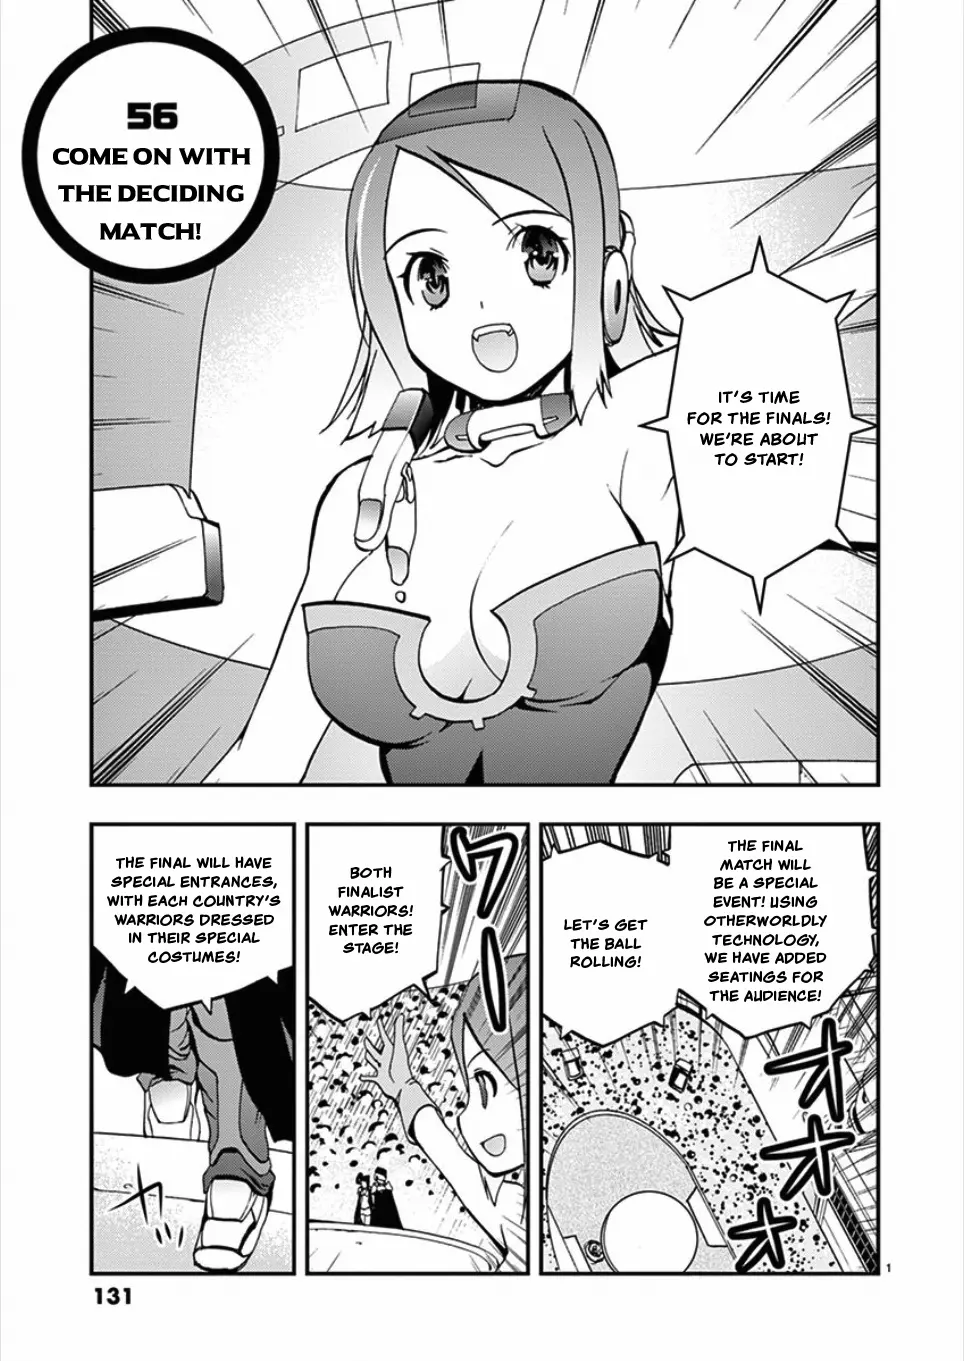 Card Girl! Maiden Summoning Undressing Wars - 56 page 1-6ec254a1